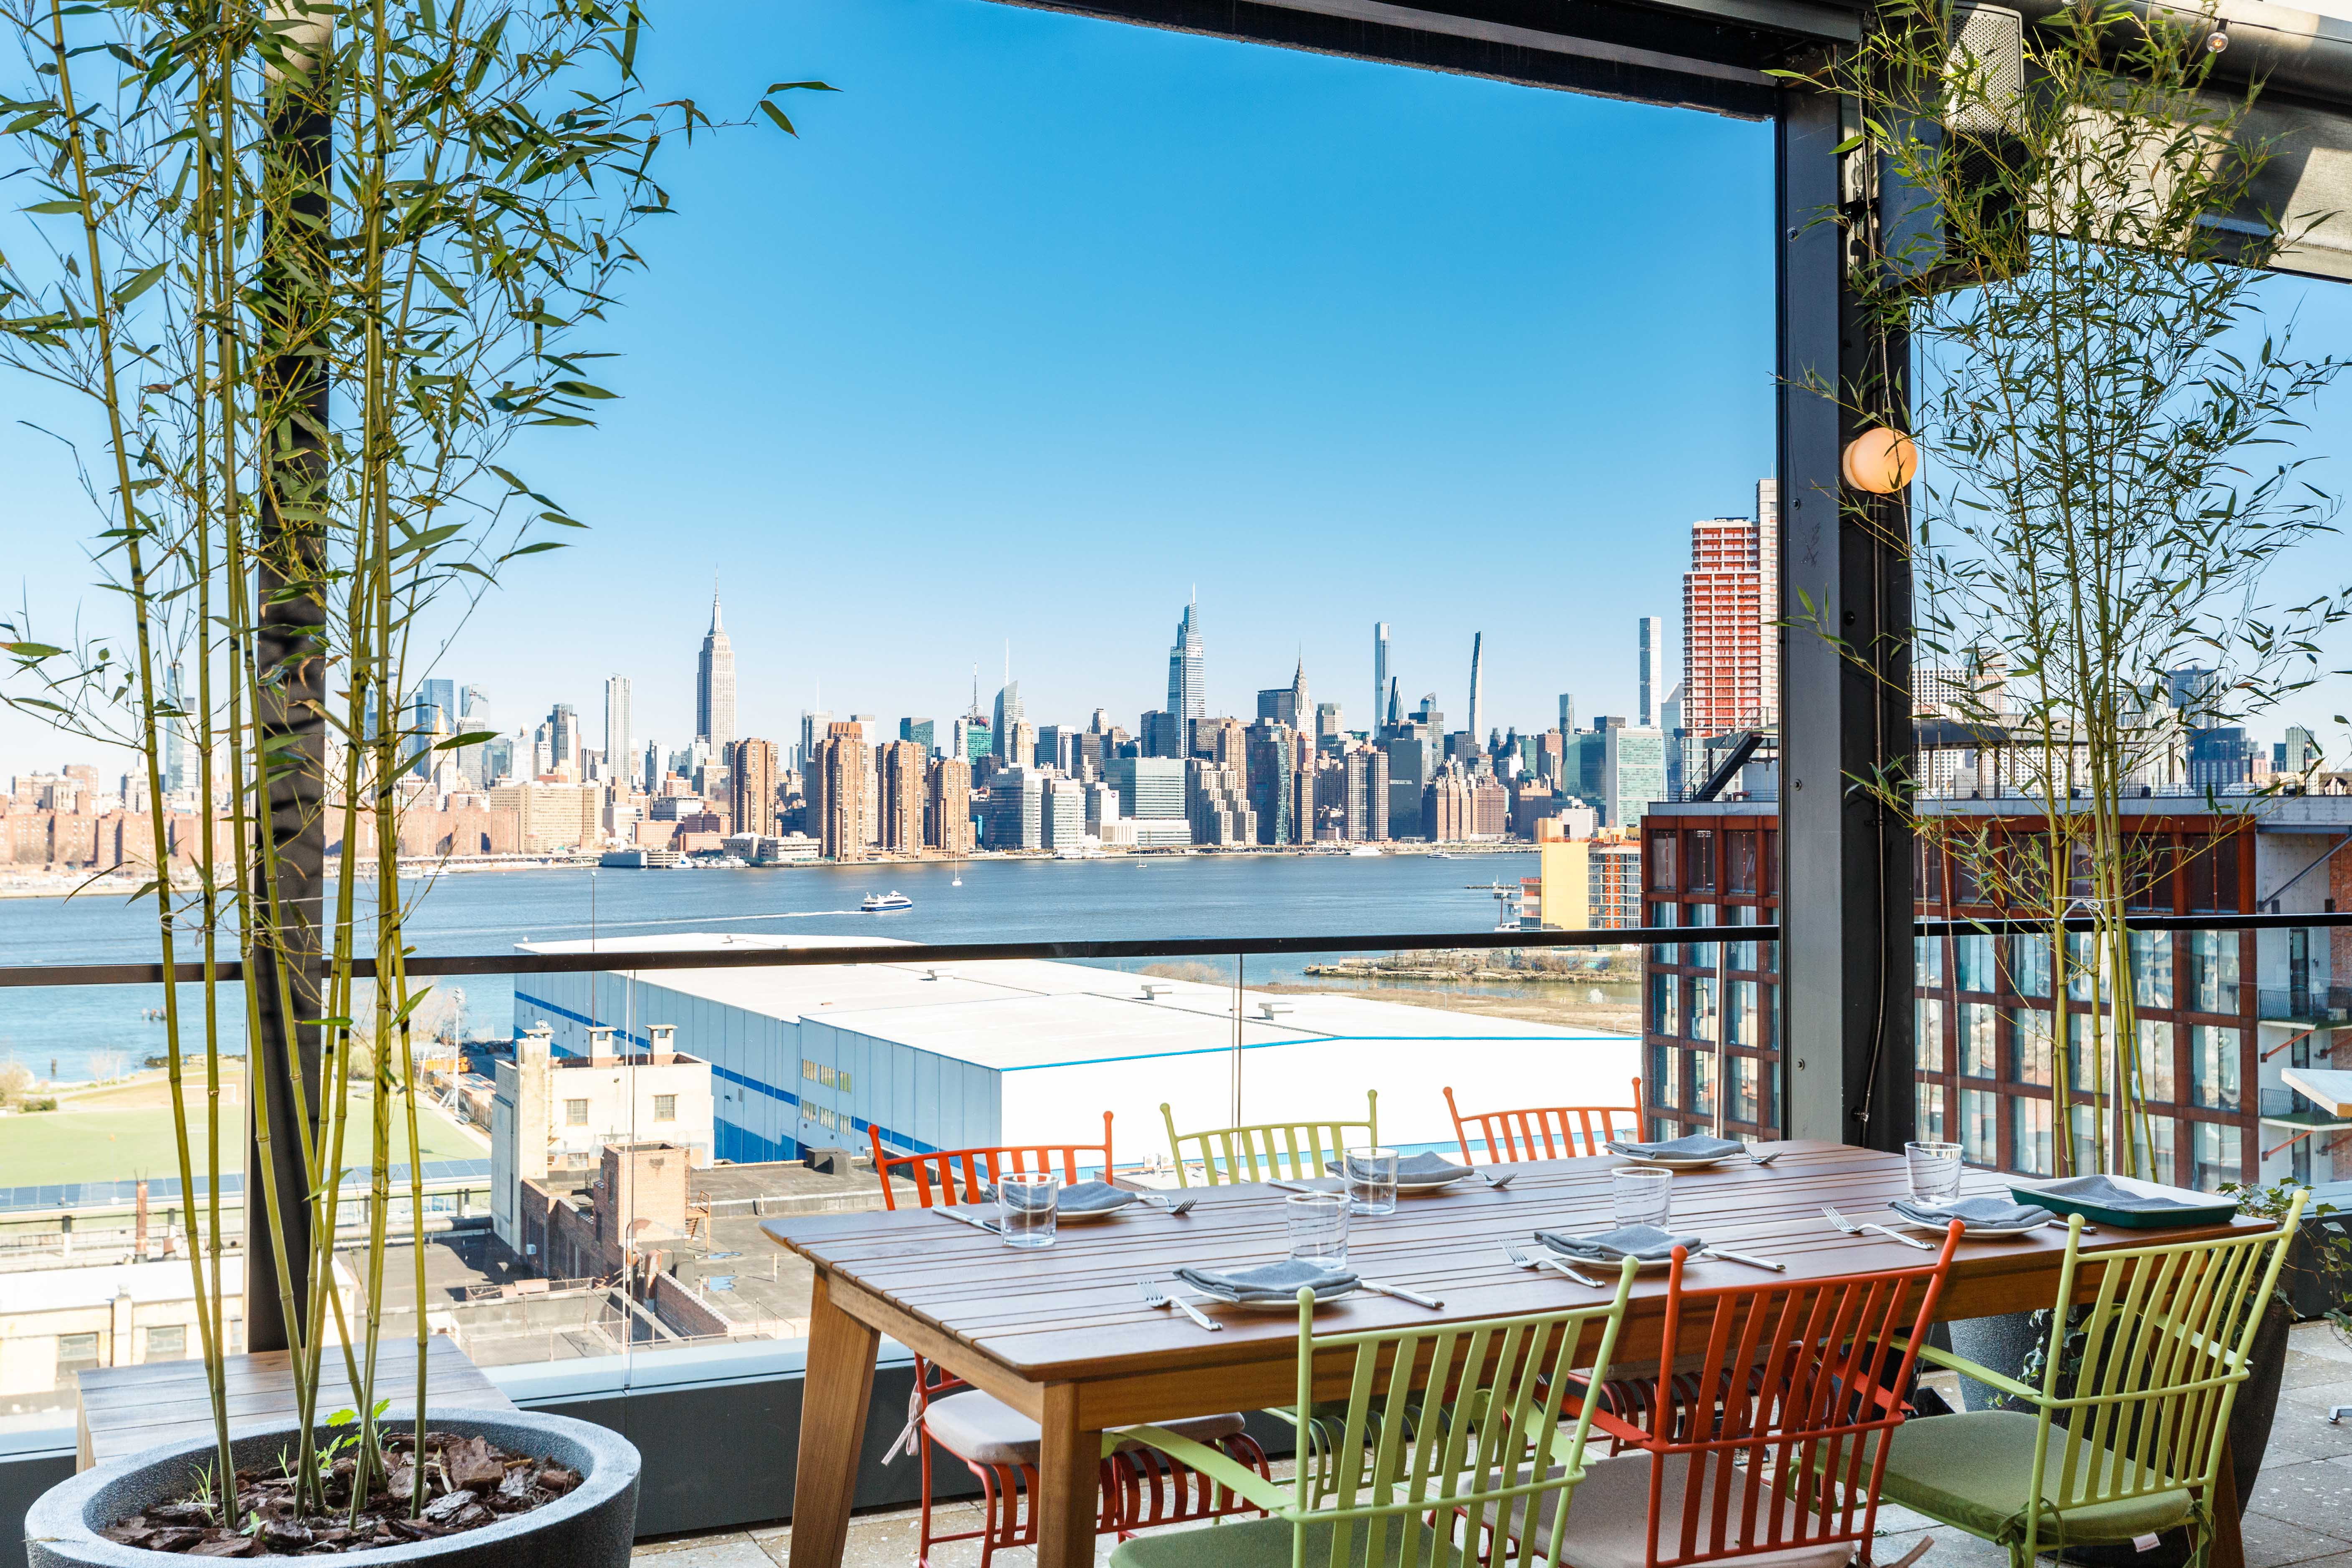 A table with multi-colored chairs in the foreground, set against a backdrop of the Manhattan skyline.